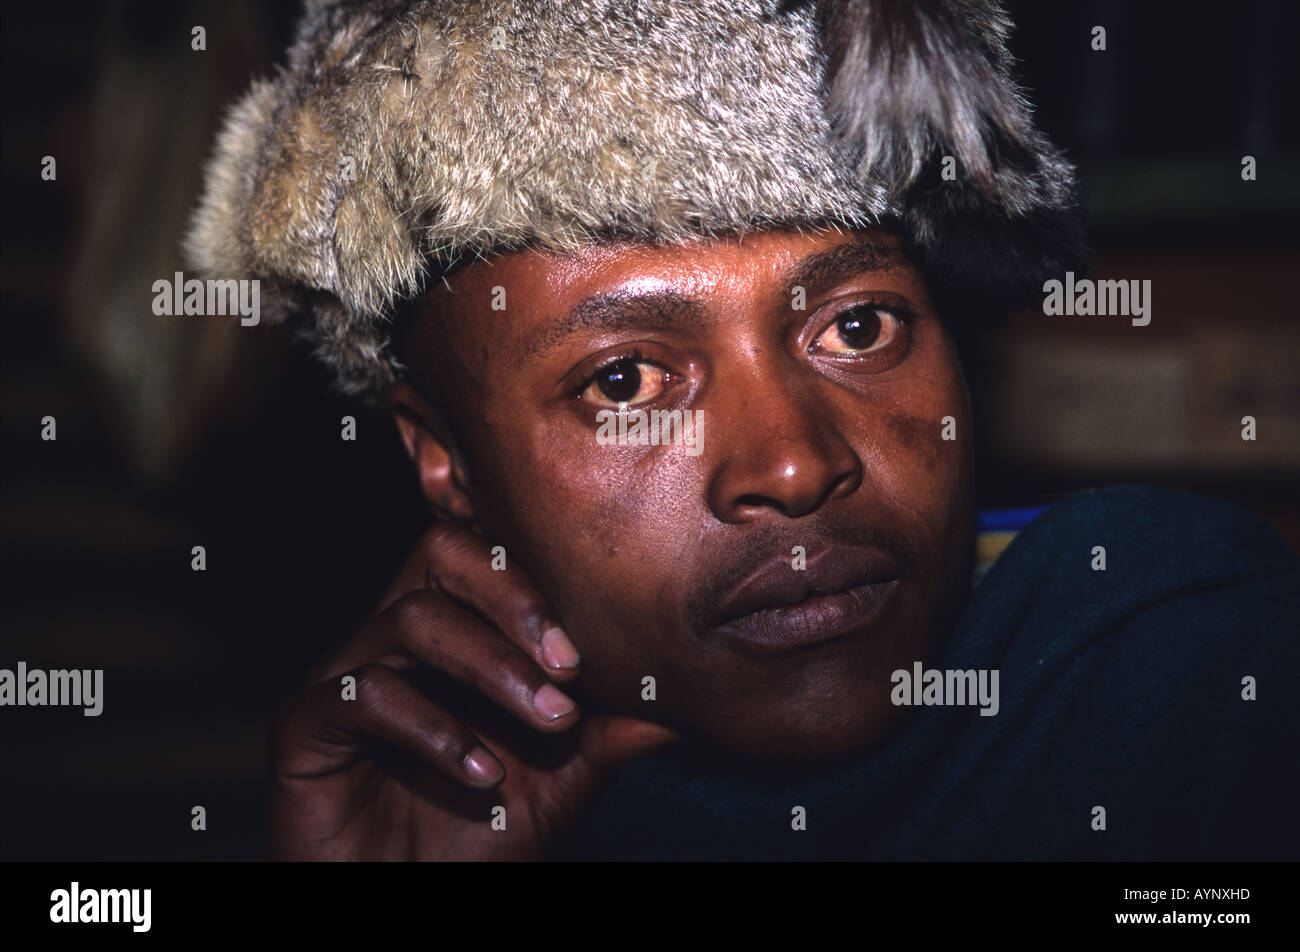 Portrait of a 'sangoma' or traditional healer in fur hat, Maputsoe, Lesotho, Southern Africa Stock Photo